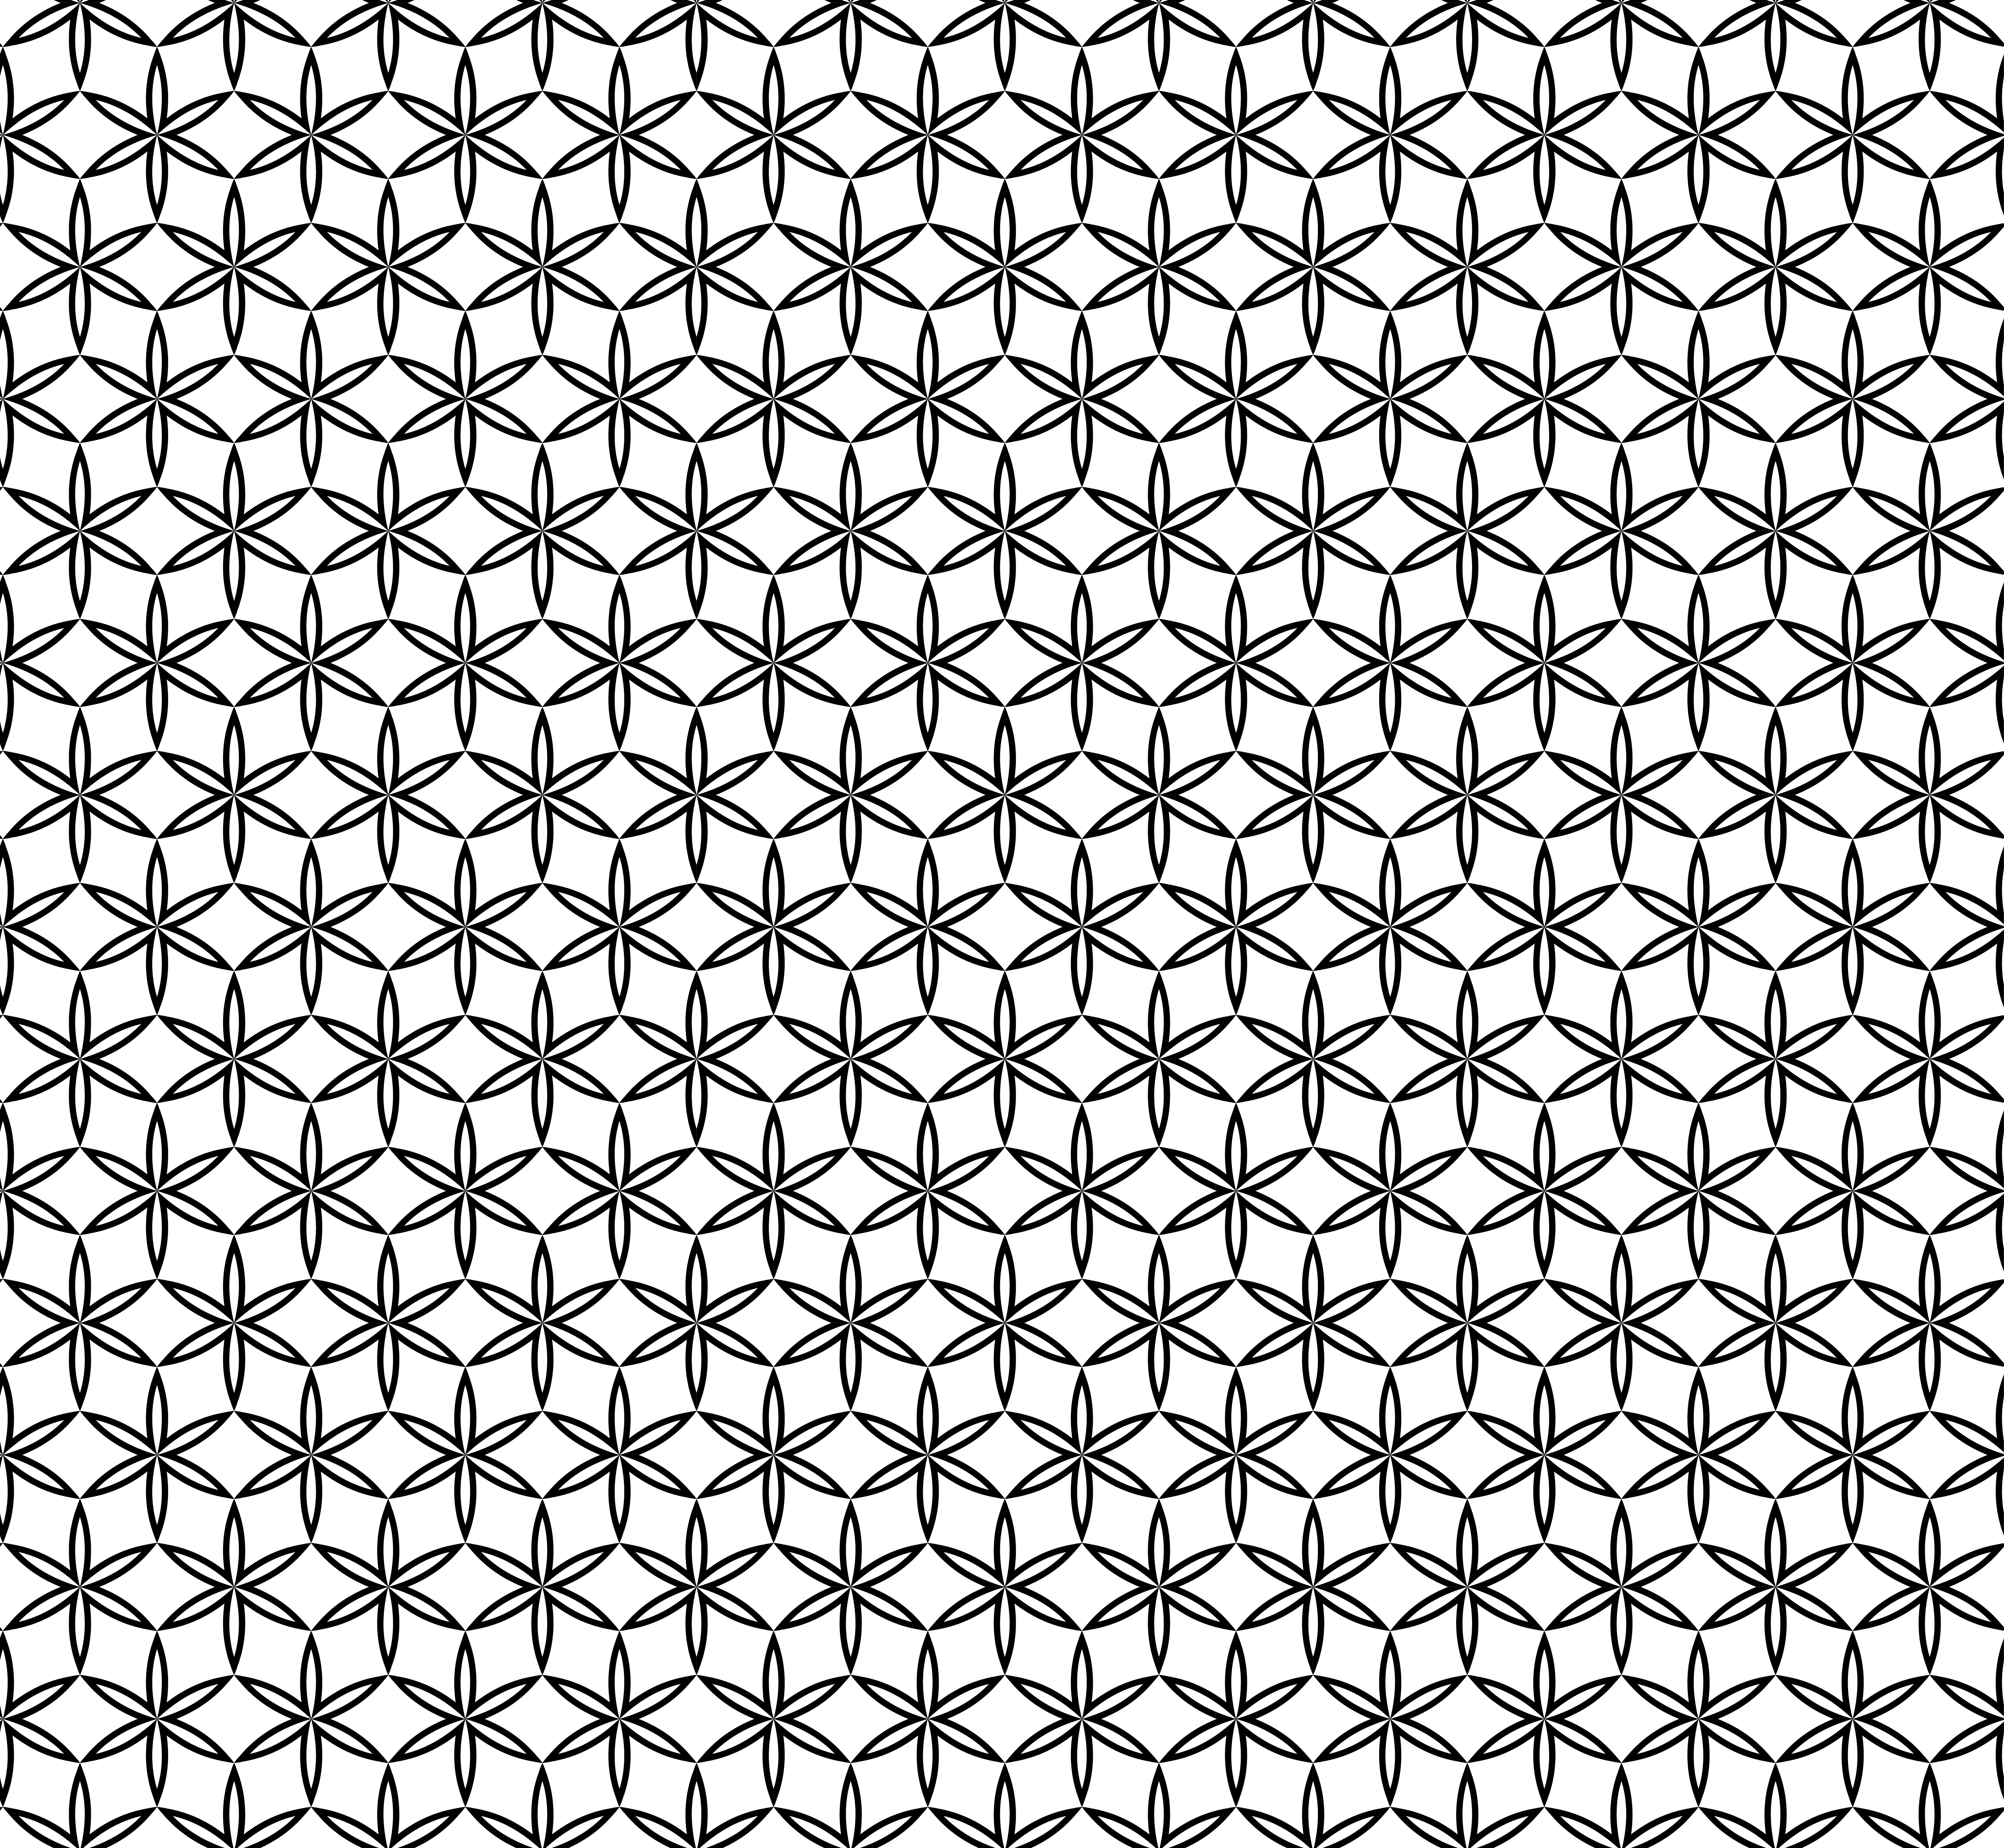 Seamless pattern line decoration abstract vector background design ... Line Pattern Design